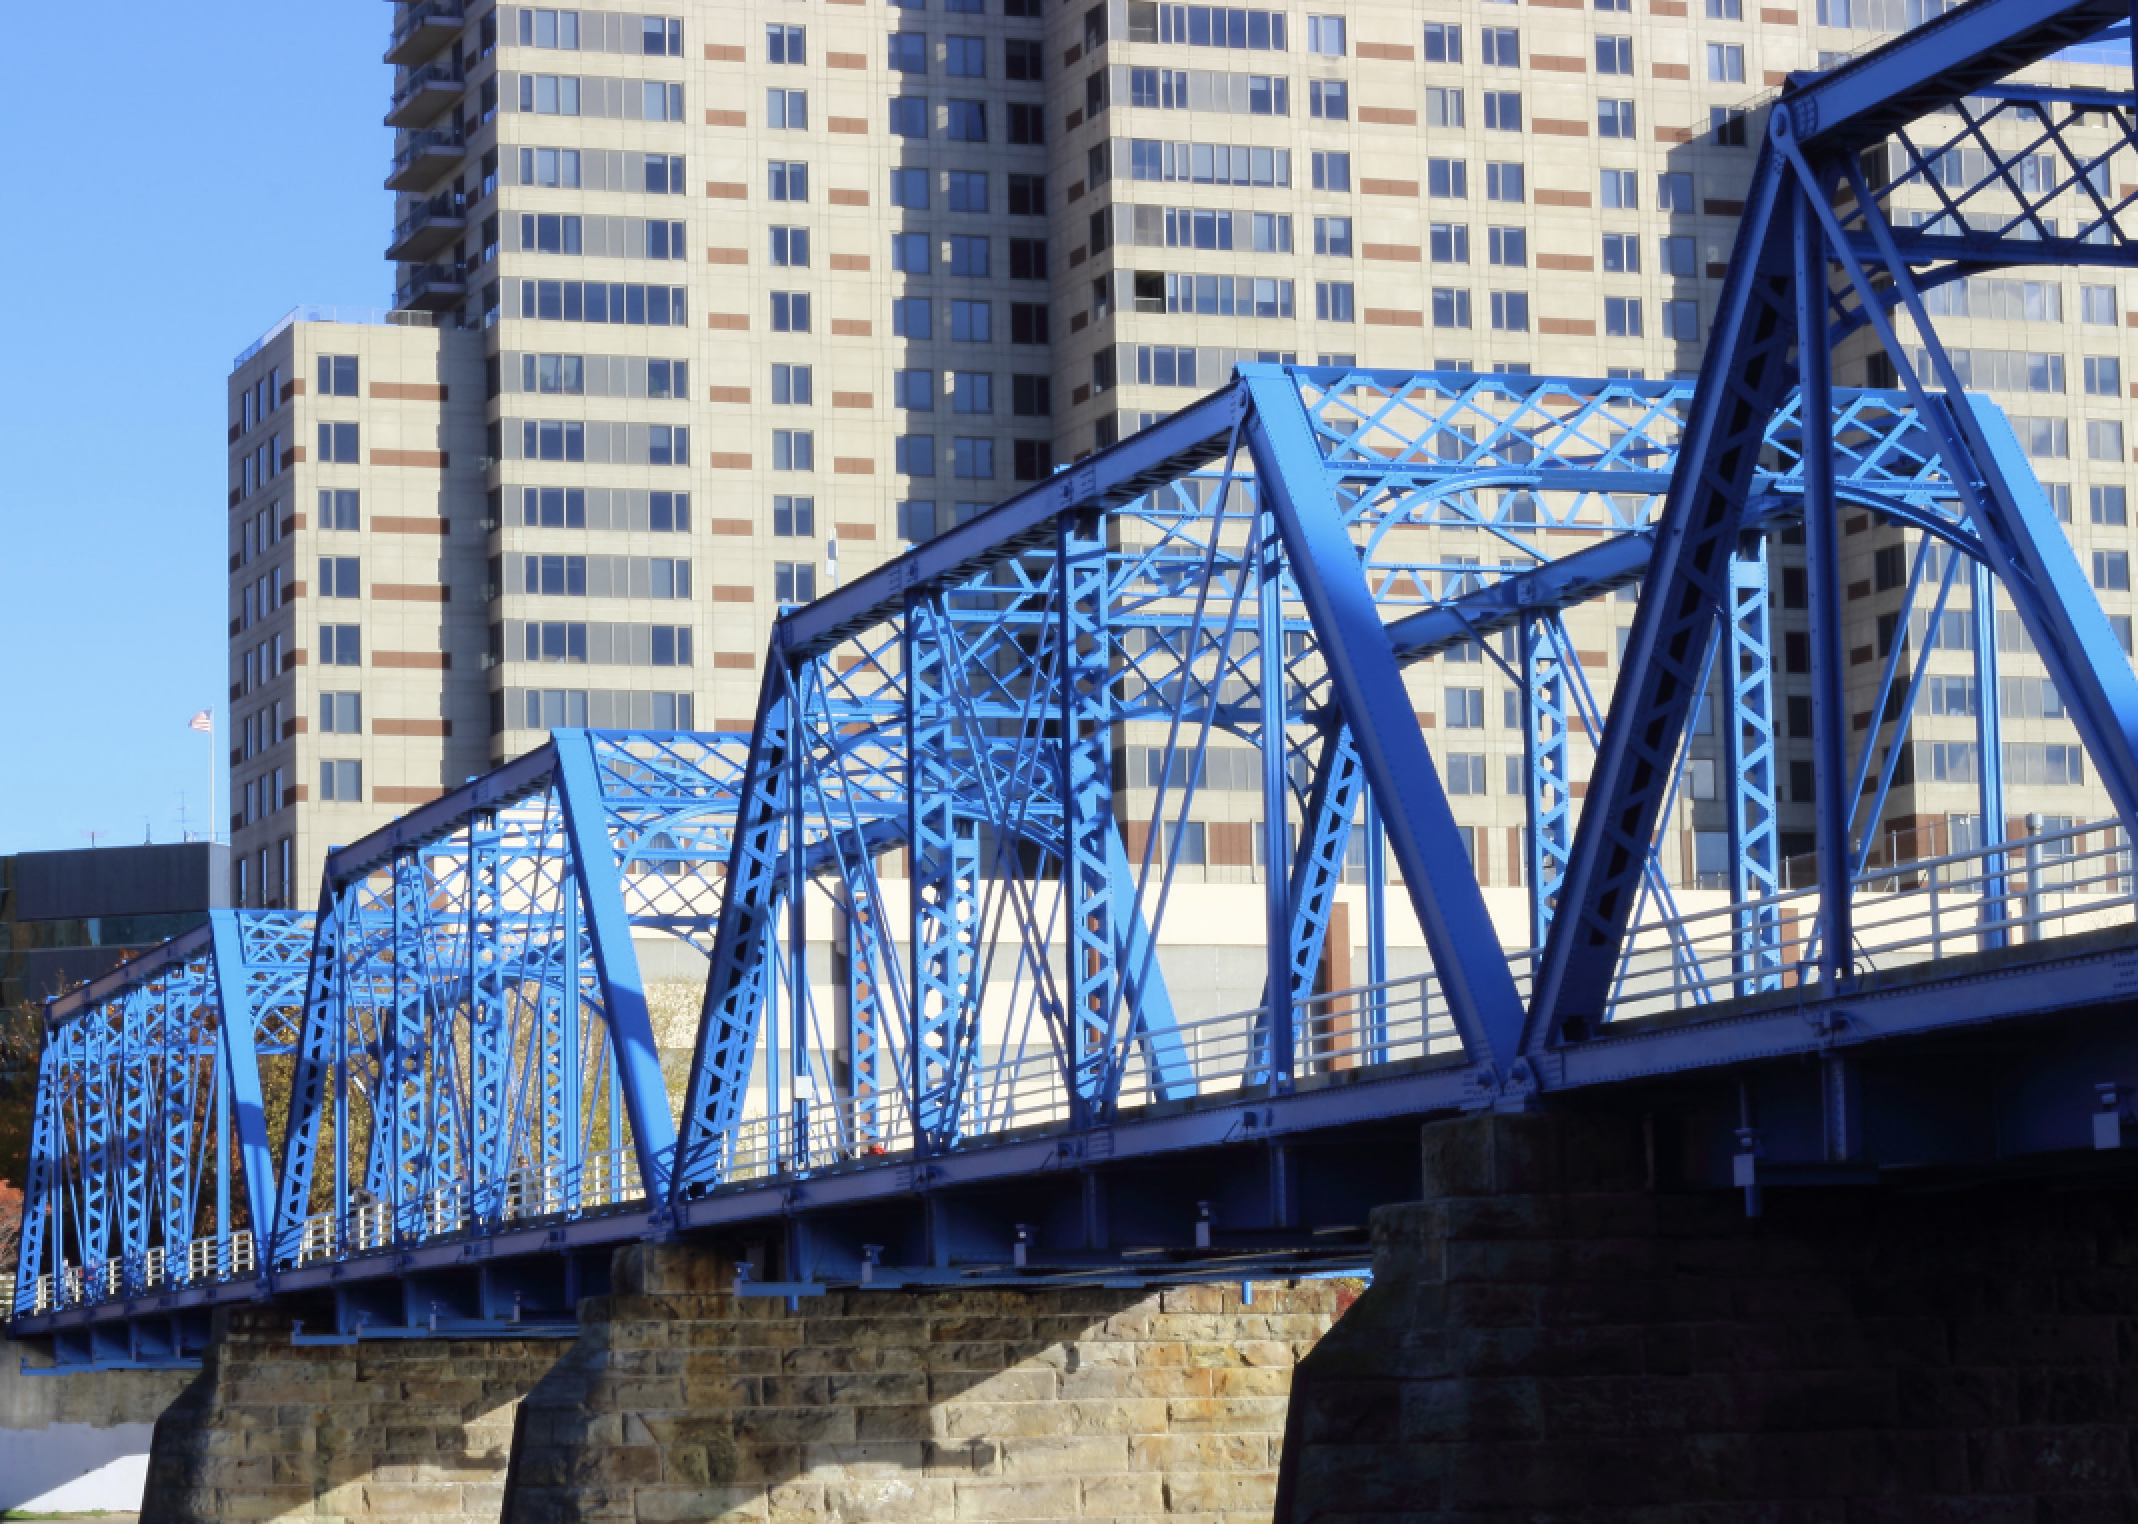 A blue bridge in front of tall buildings.